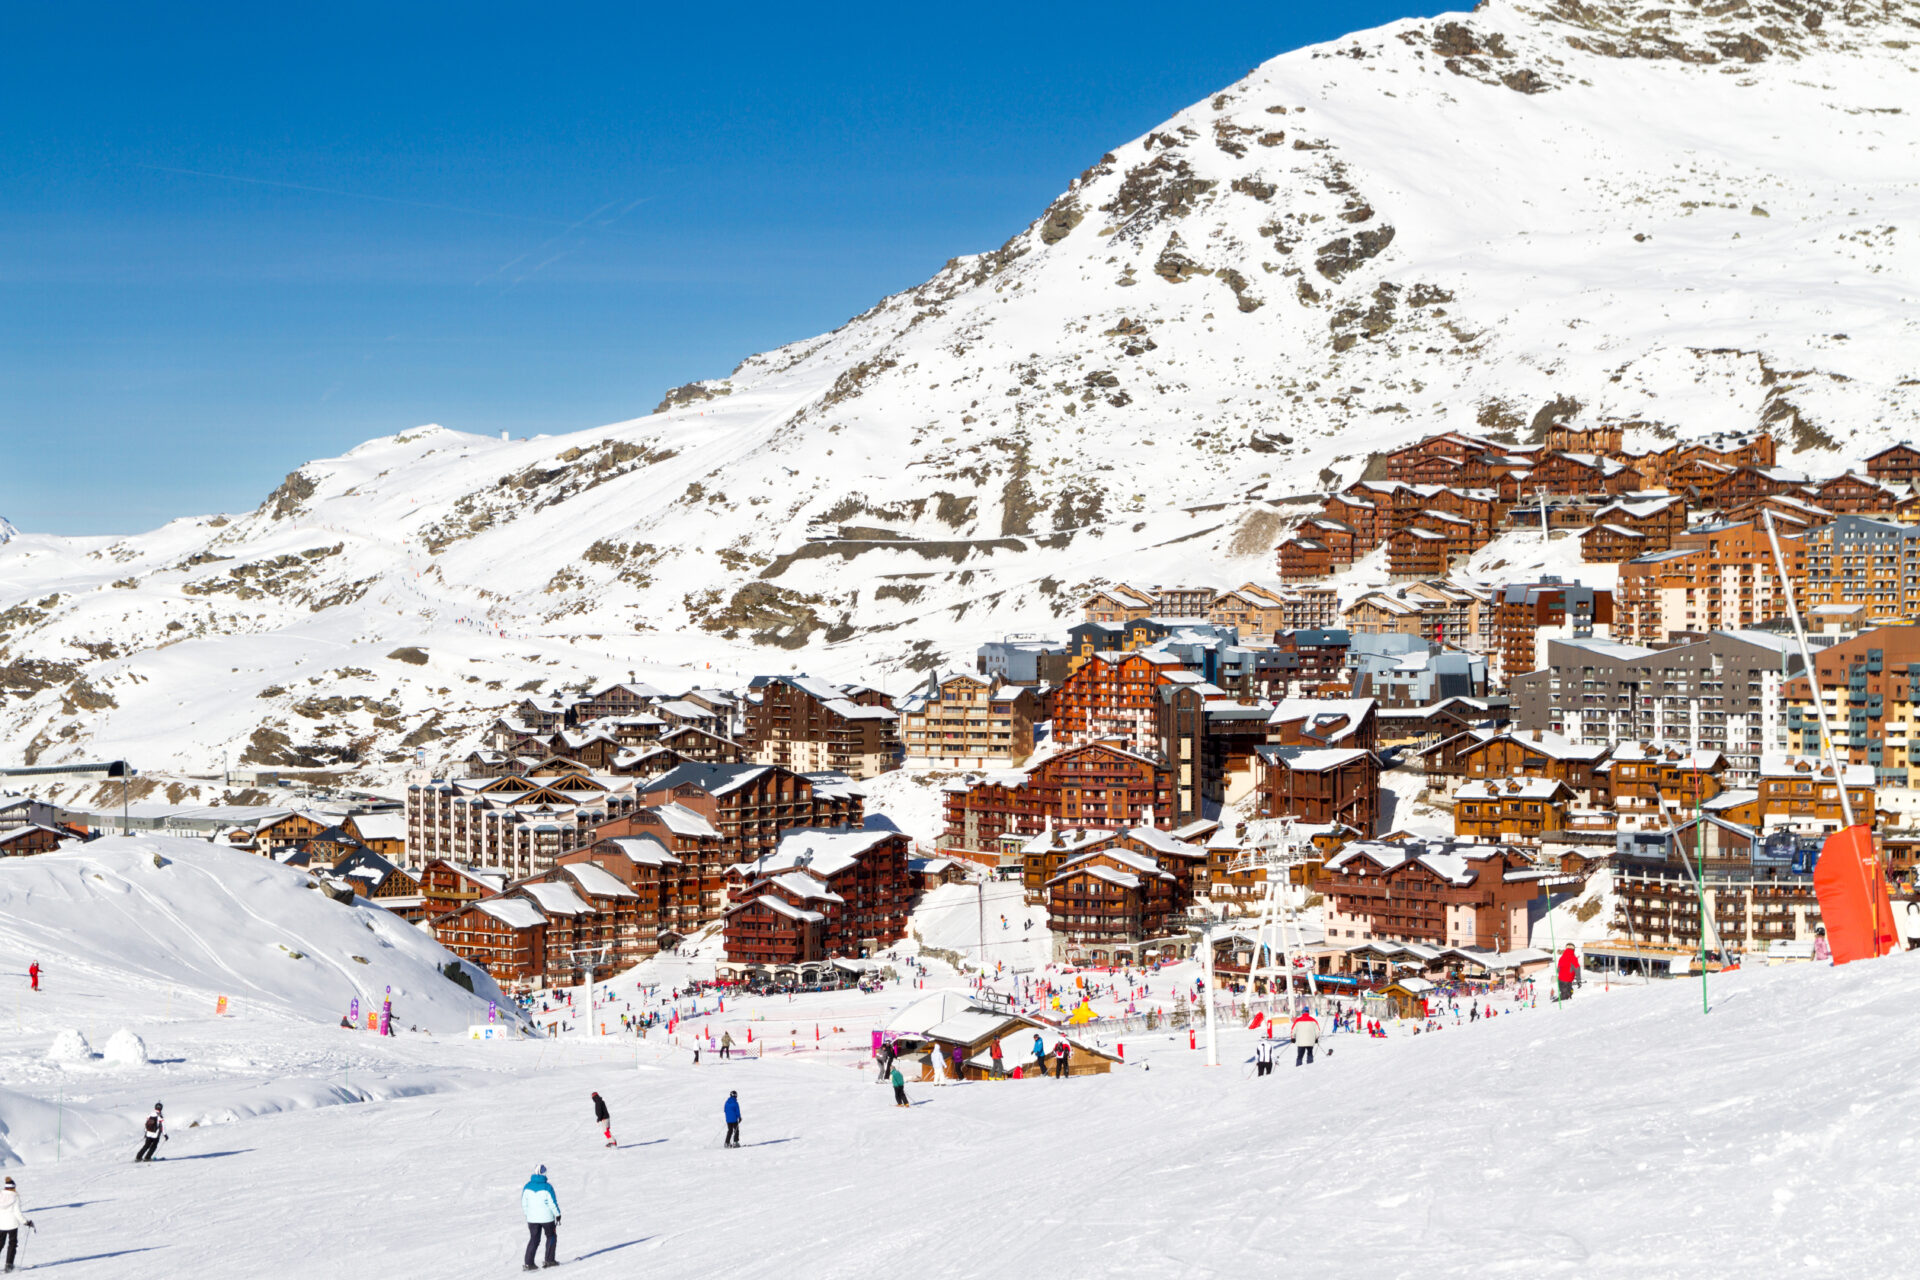 An image of Val Thorens